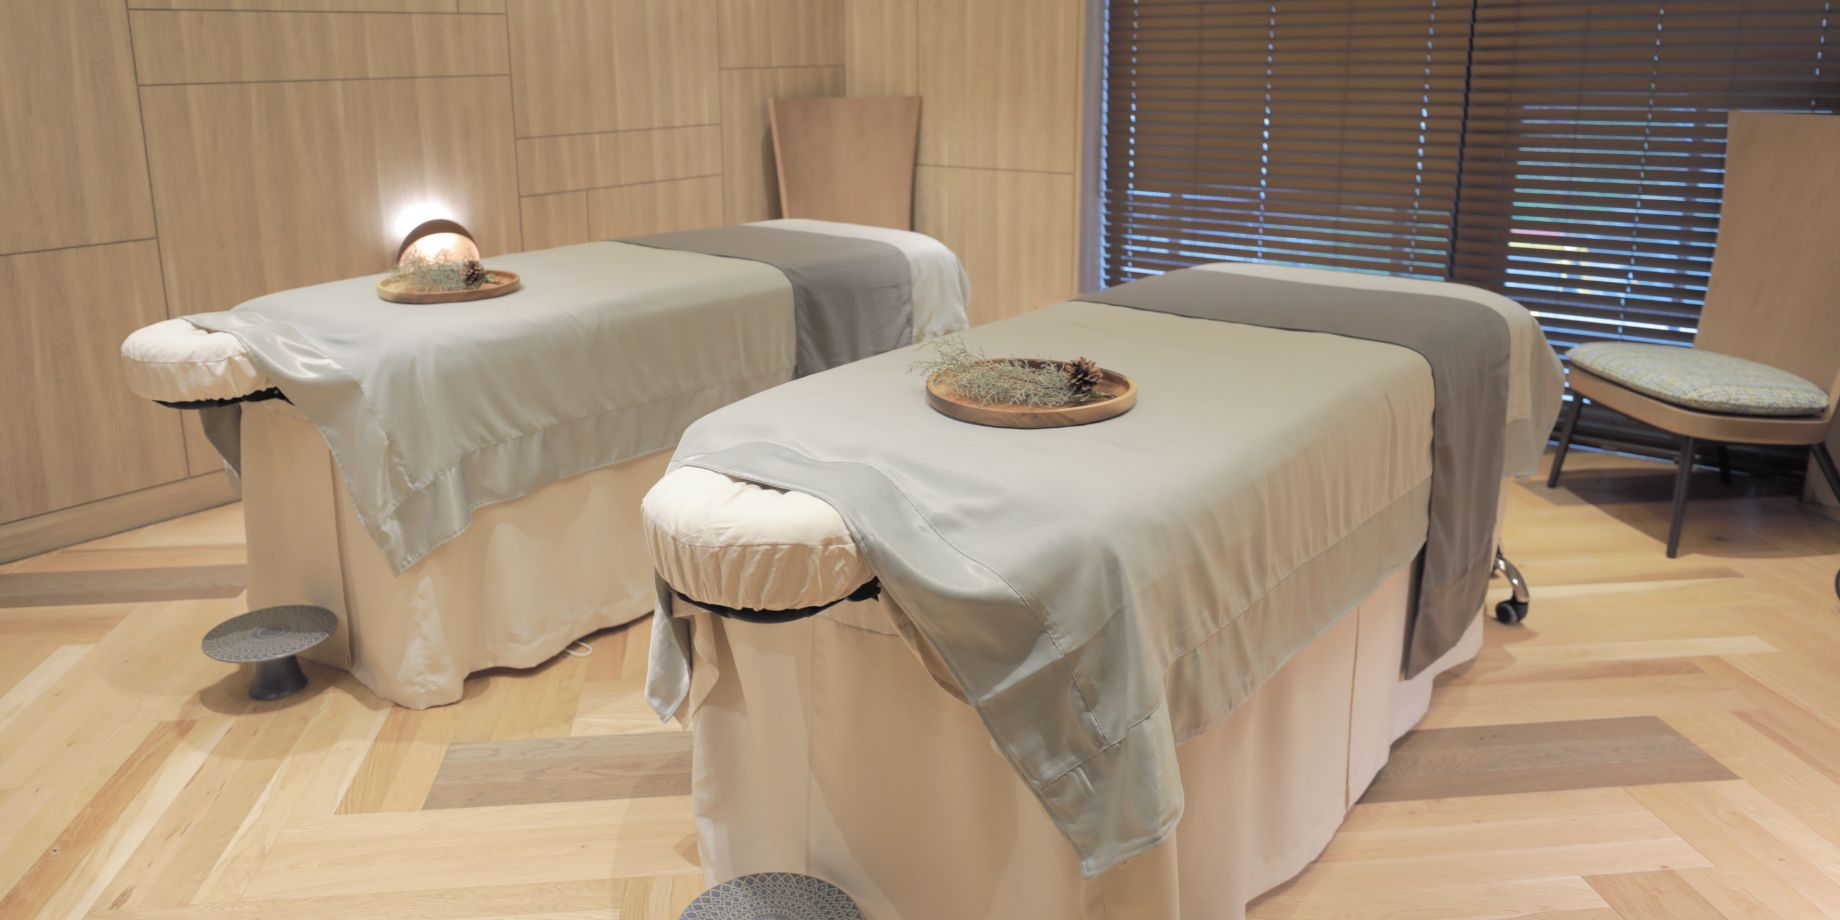 Spa BY HARNN was founded in Thailand and is well known for its exceptional treatments